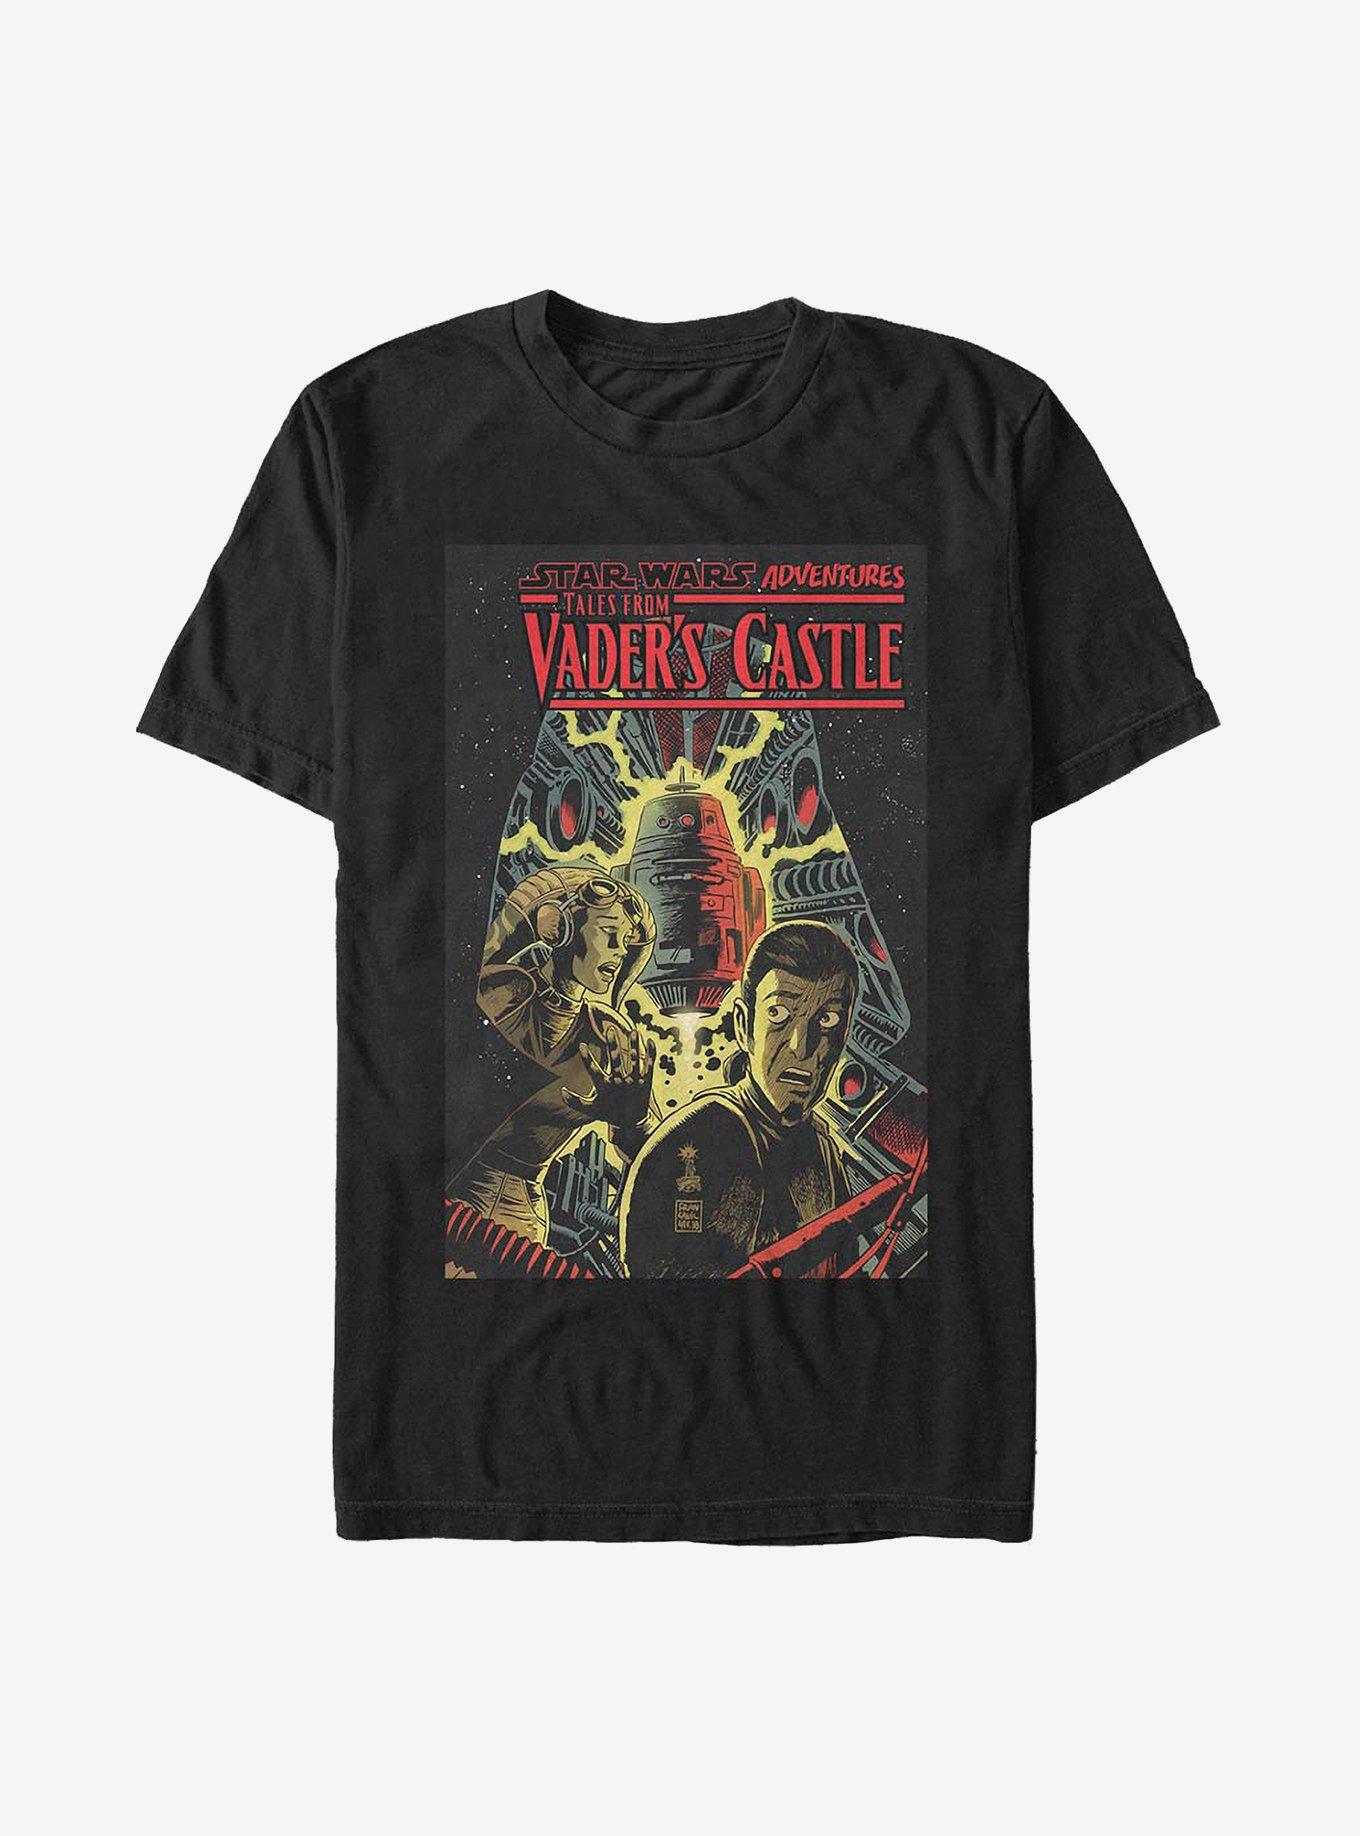 Star Wars Spaceship Tales From Vader's Castle T-Shirt, BLACK, hi-res